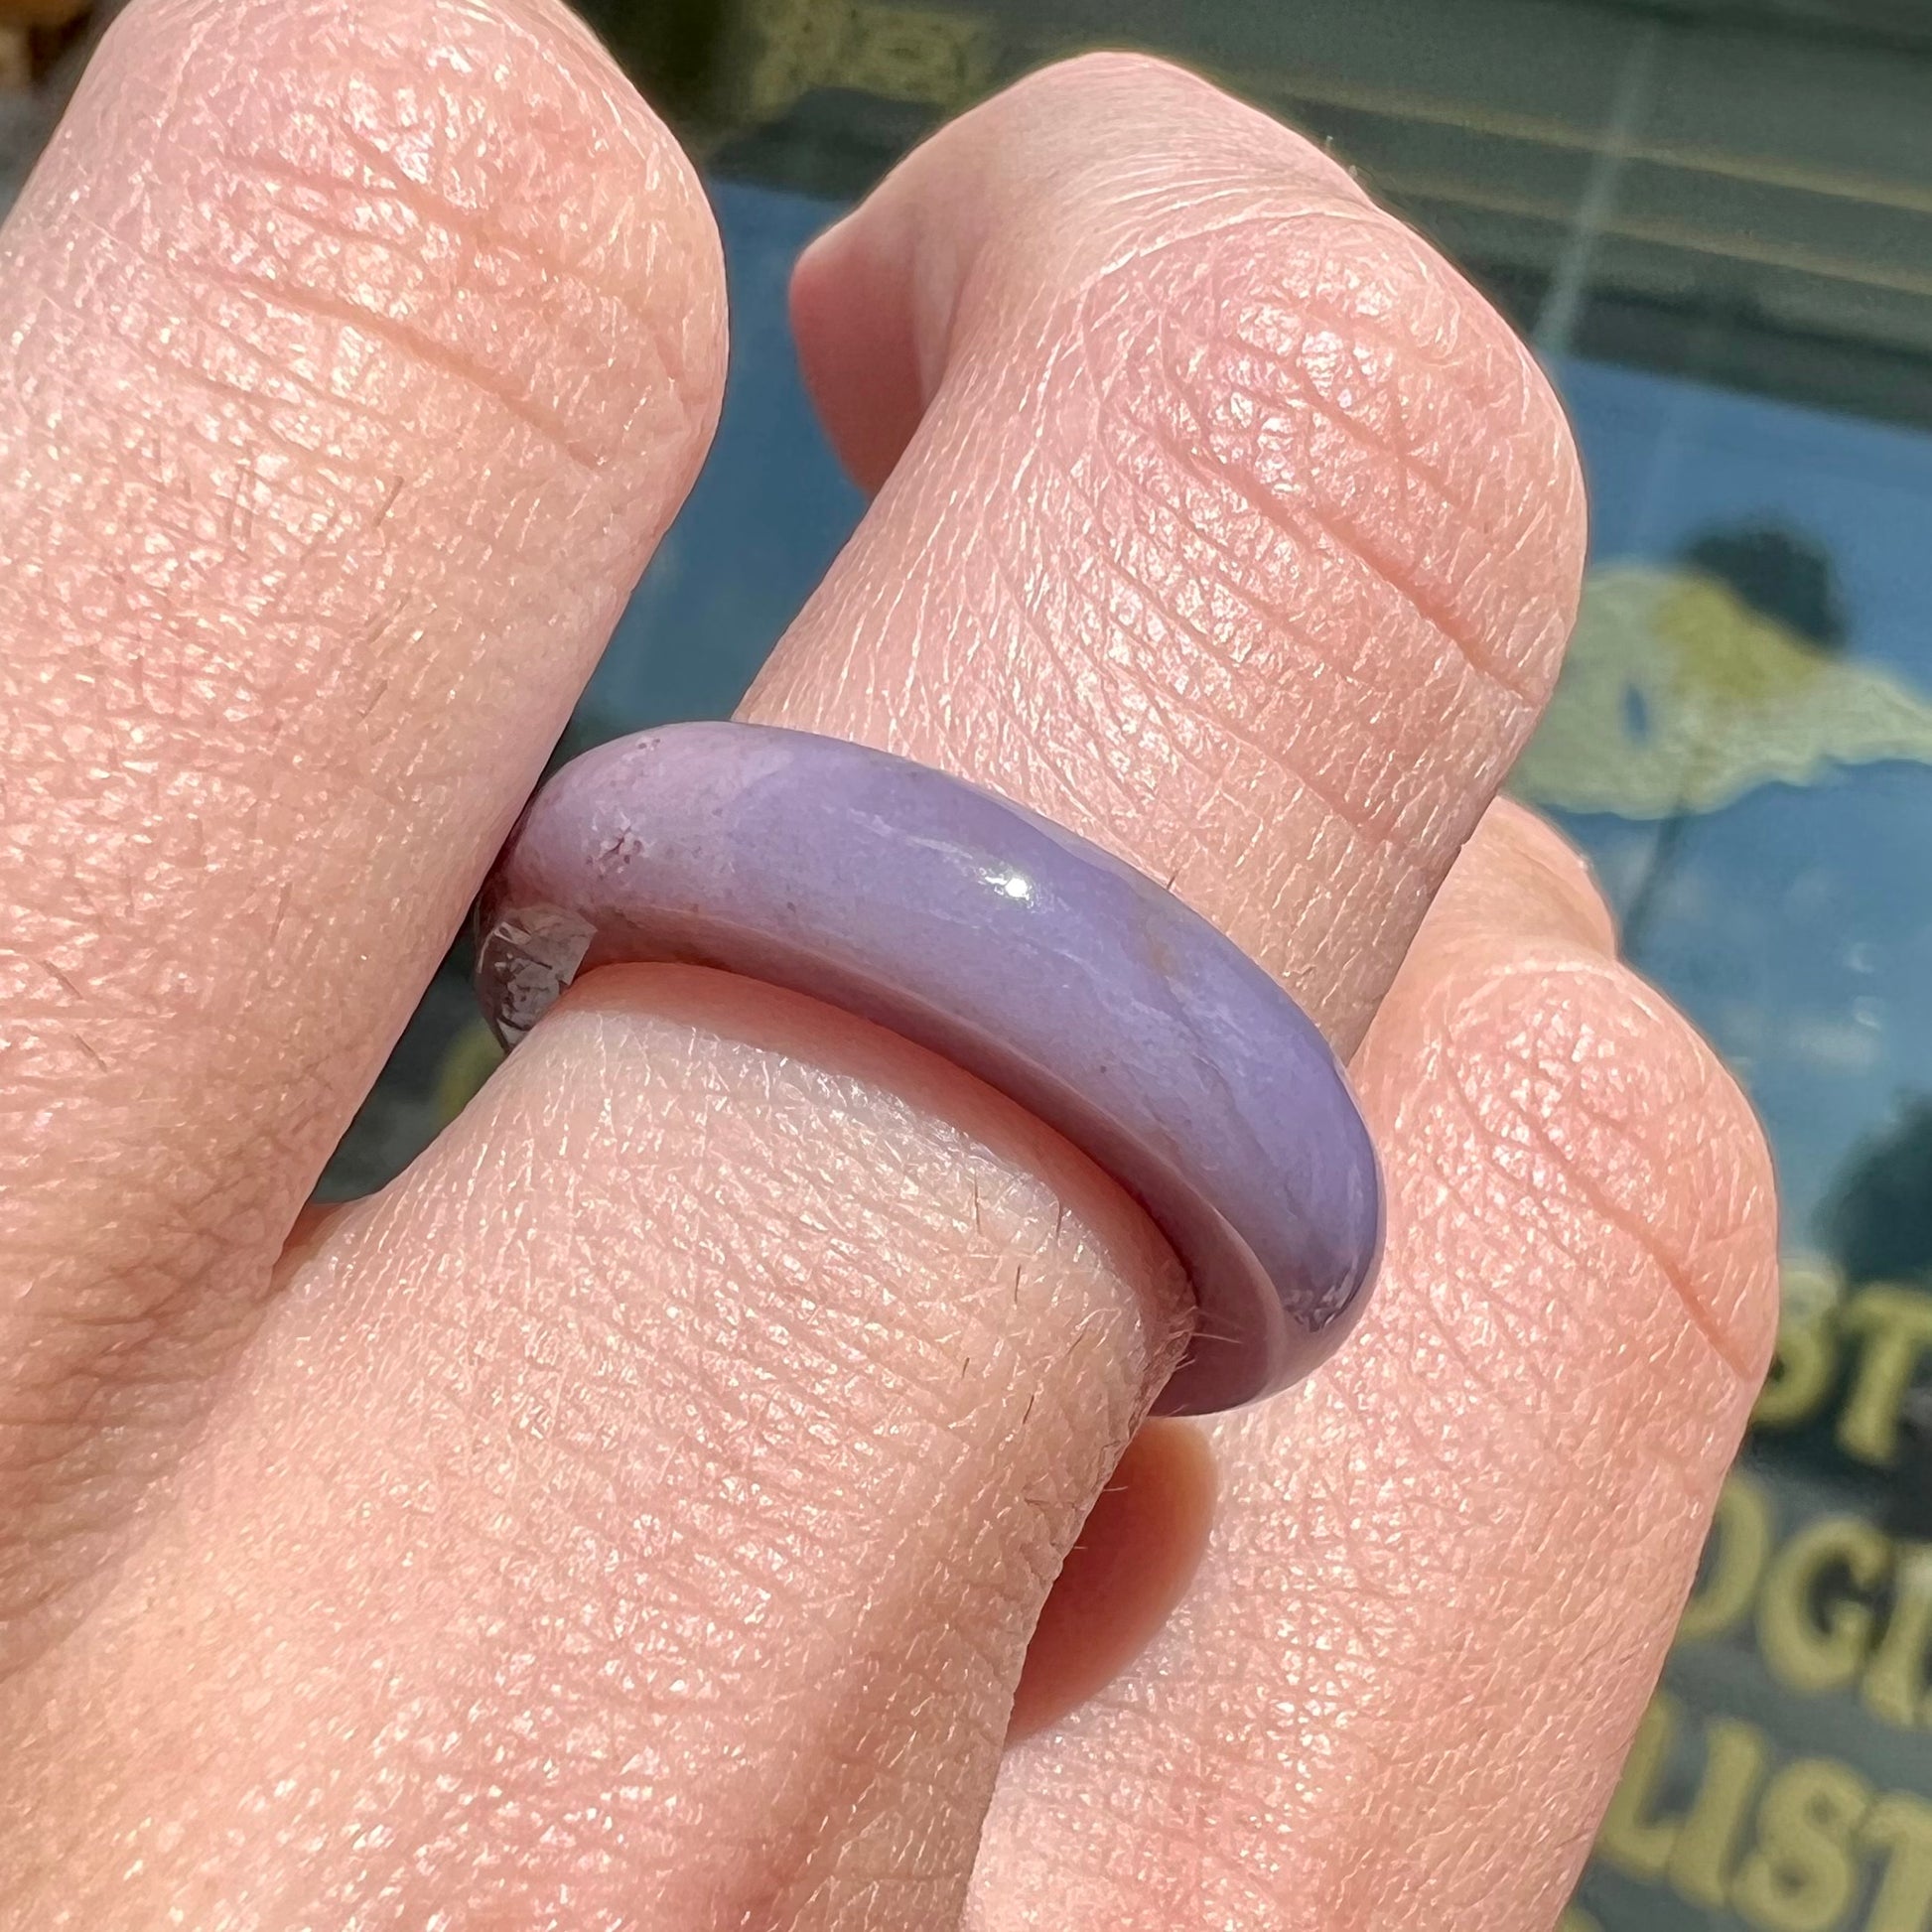 A carved lavender jade stone band.